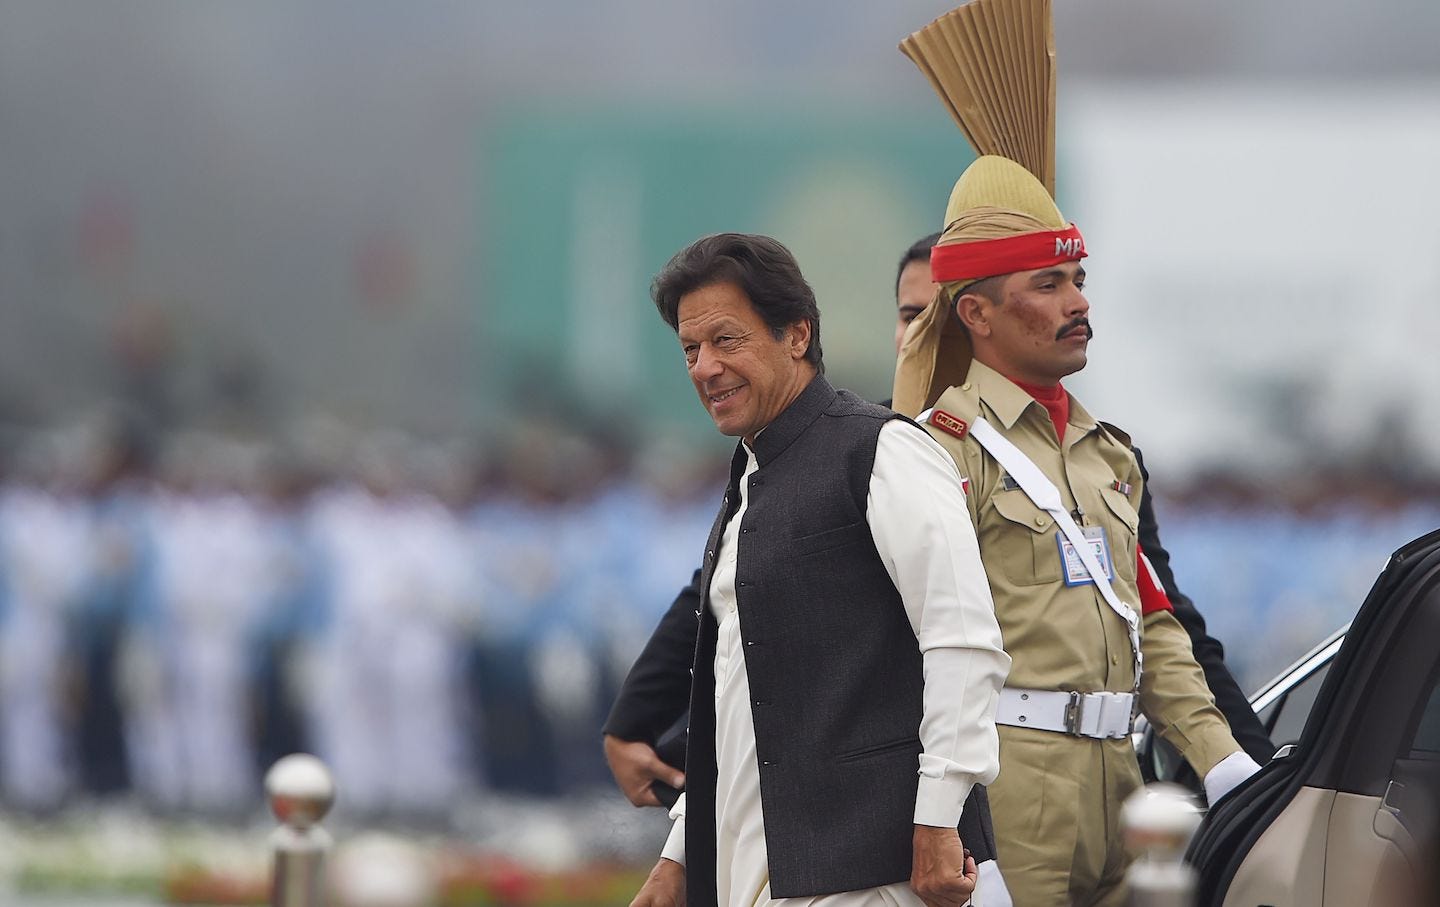 Imran Khan Faces a Standoff With the Pakistani Military | The Nation